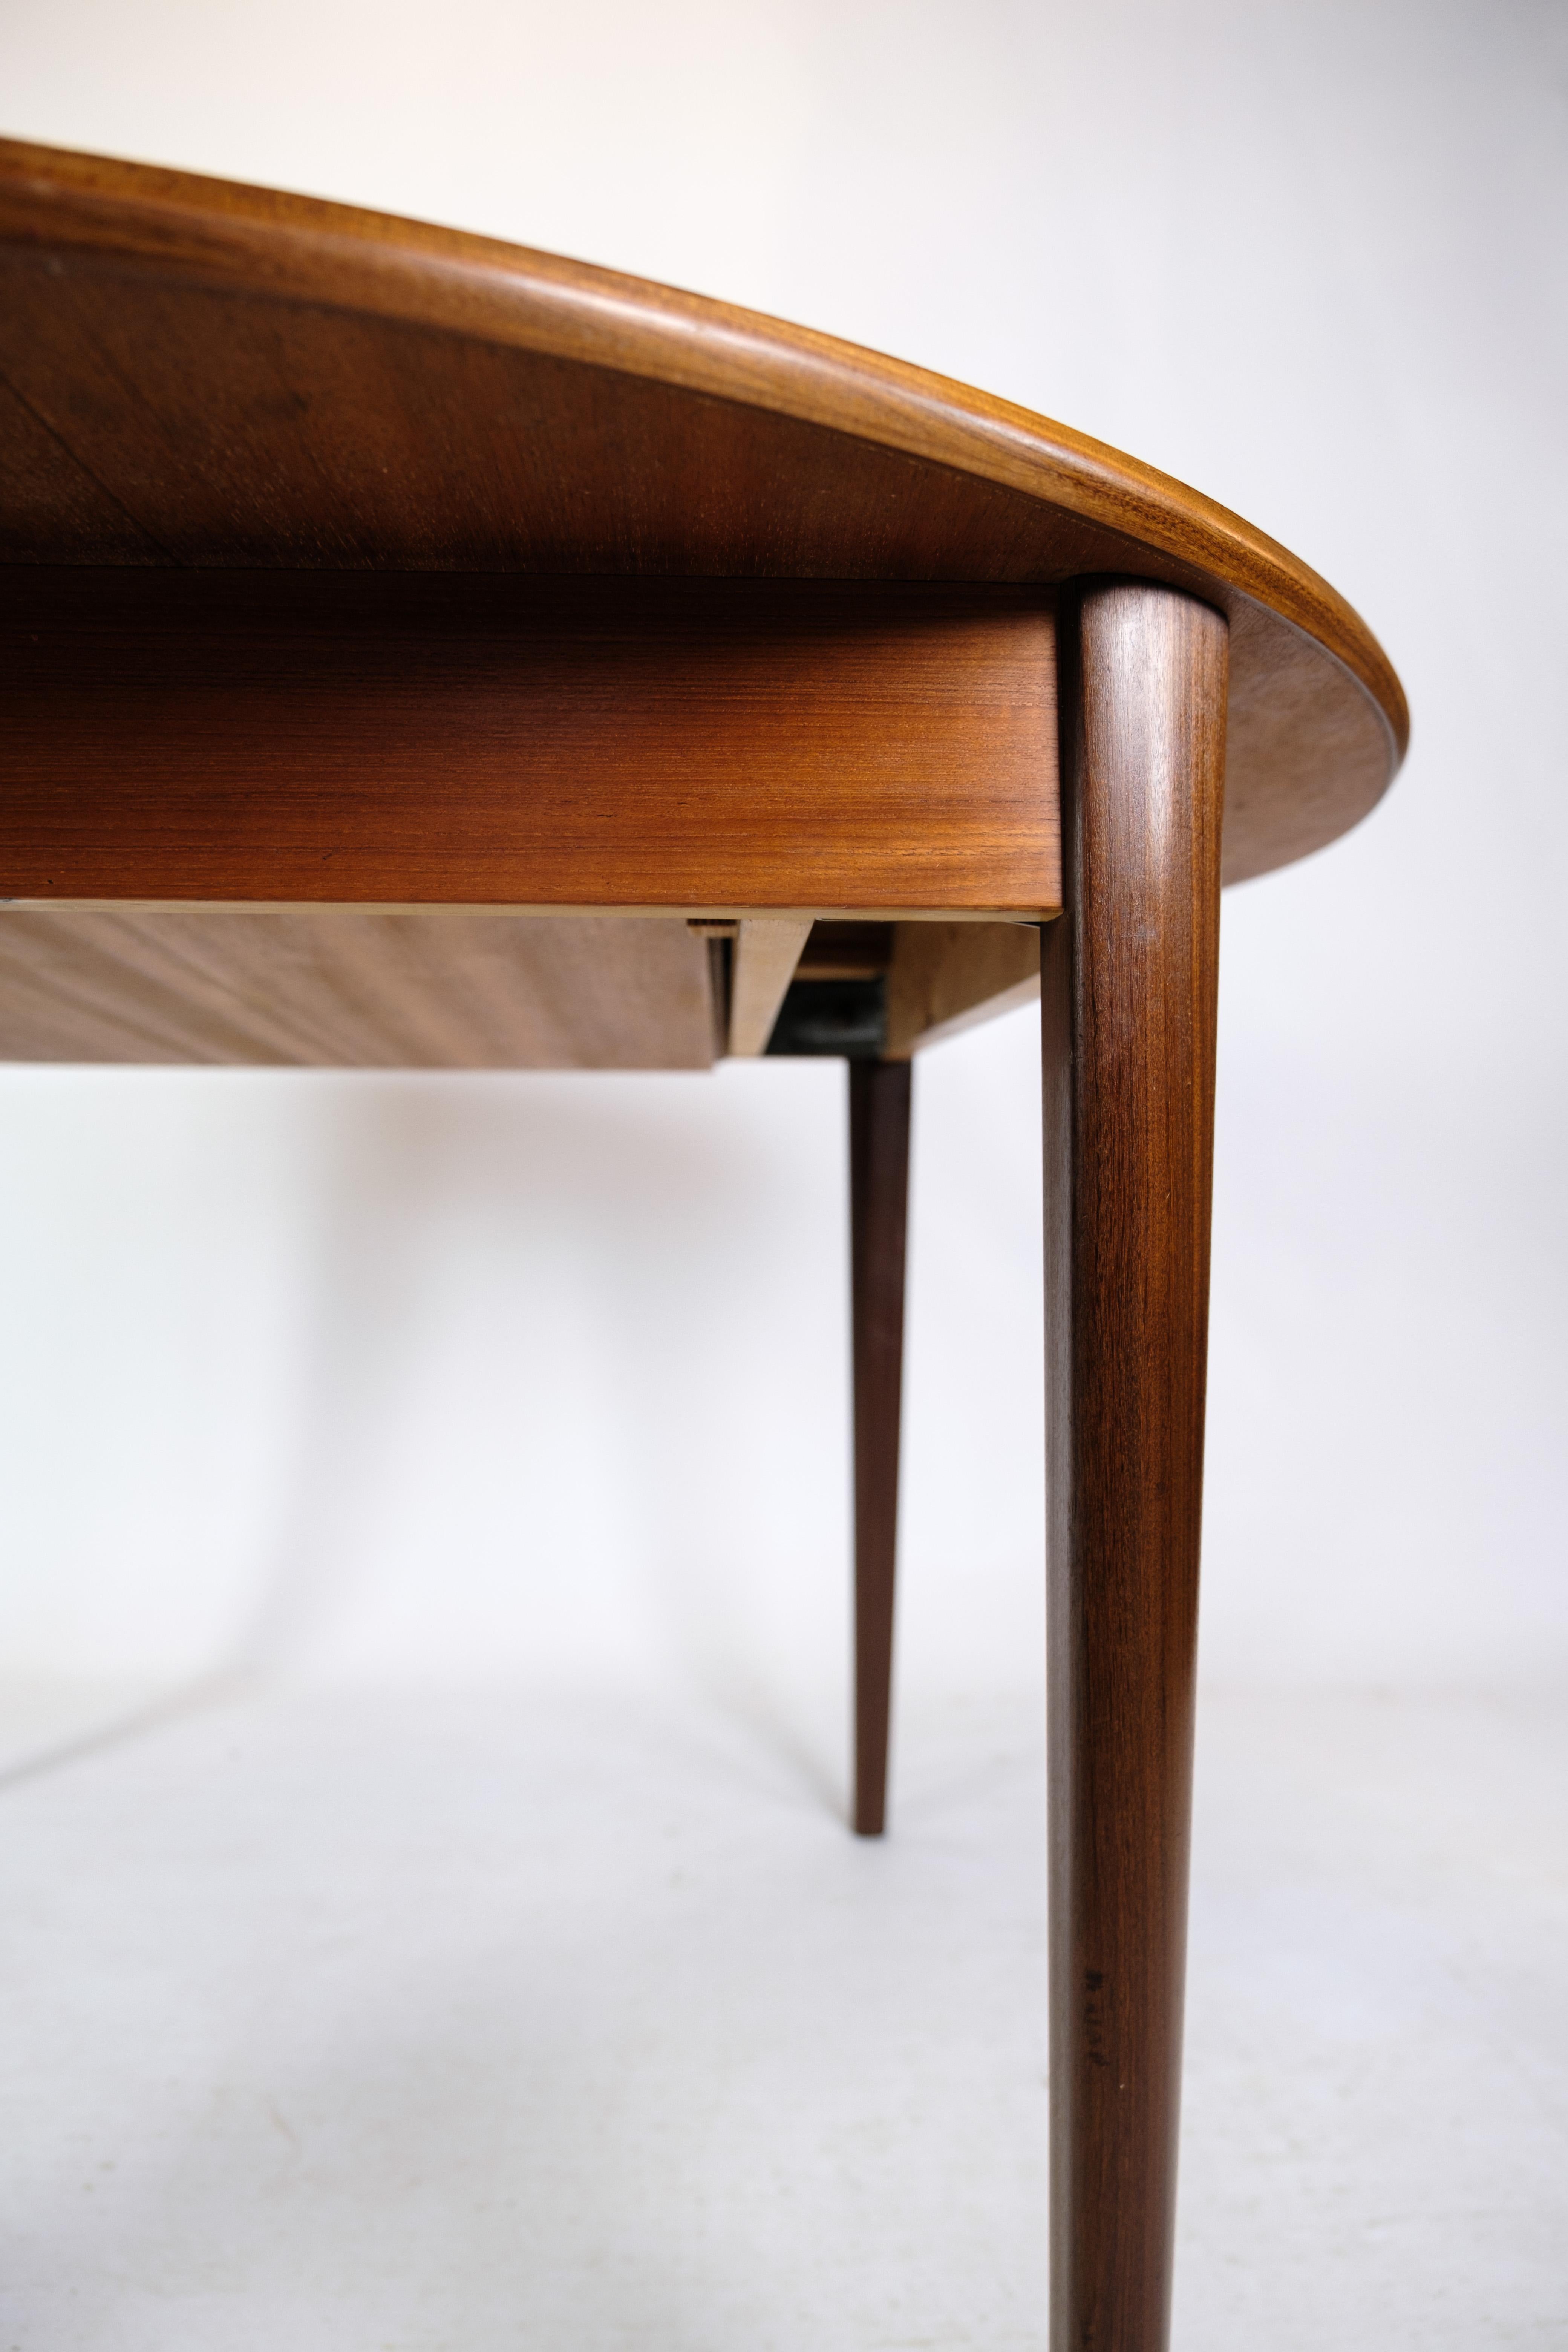 Teak dining table with built-in additional plate and round legs of Danish design from around the 1960s.
Measurements in cm: H:73 Dia: 120
Pull-out plate: 55
Total length: 175 cm